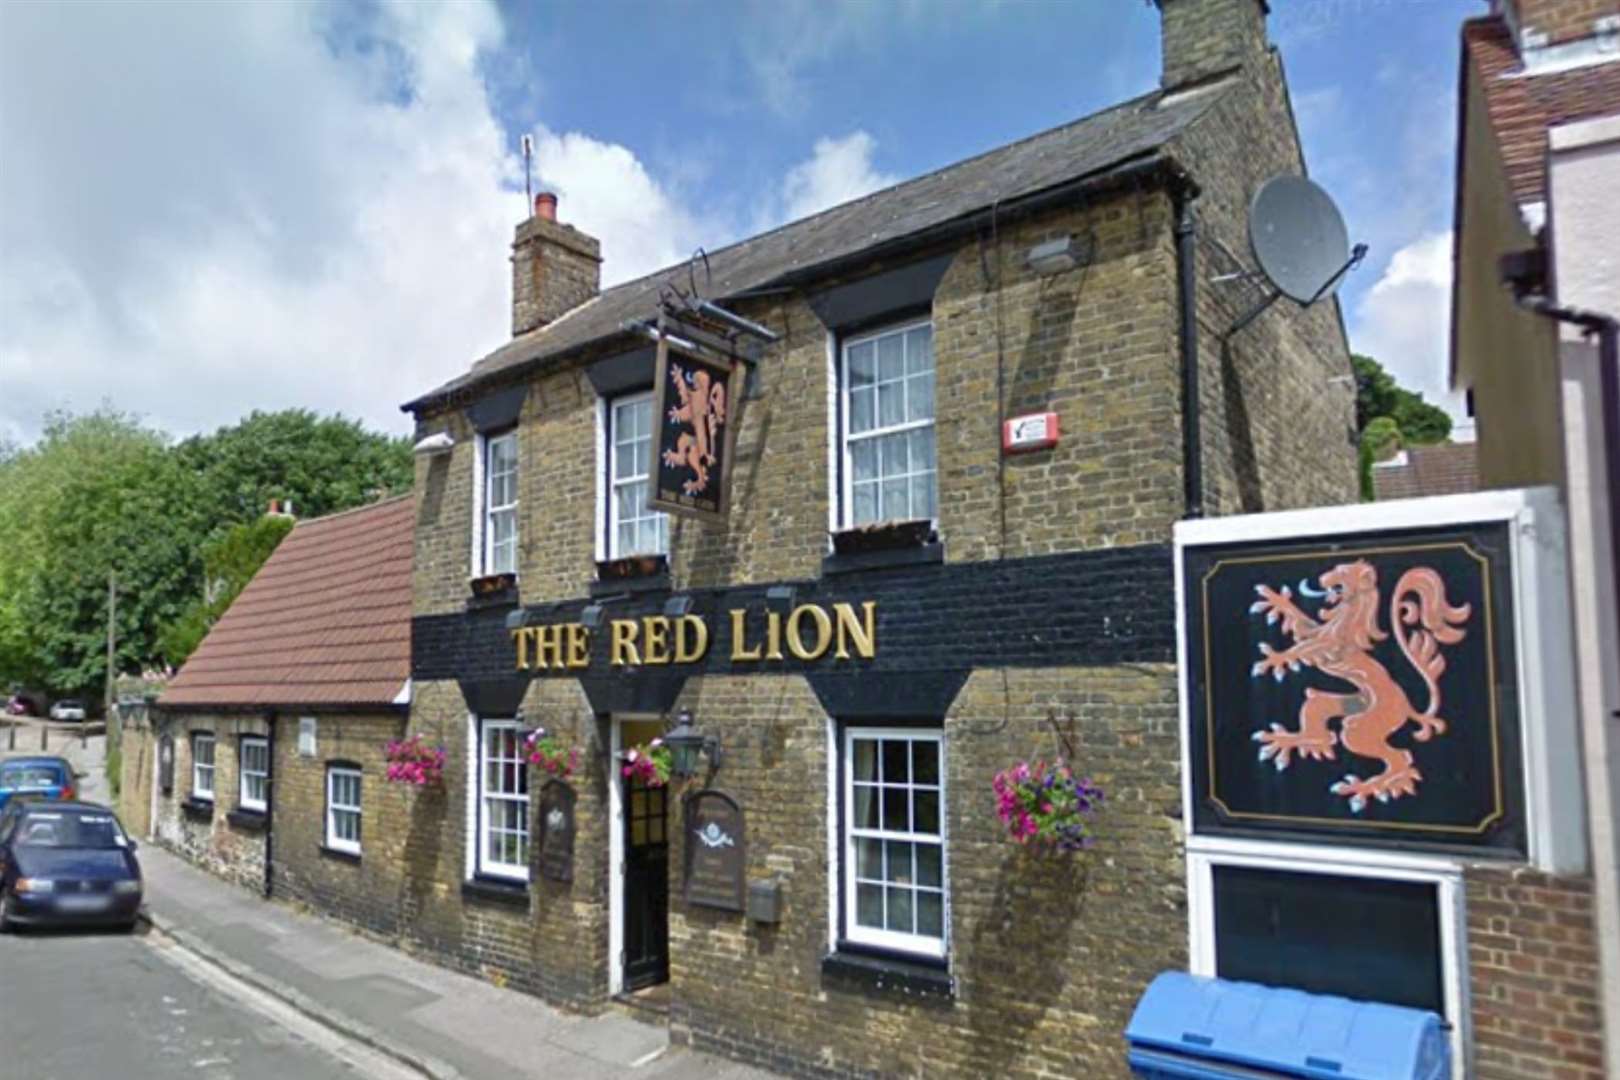 The pub is set to reopen this week. Picture: Google Maps